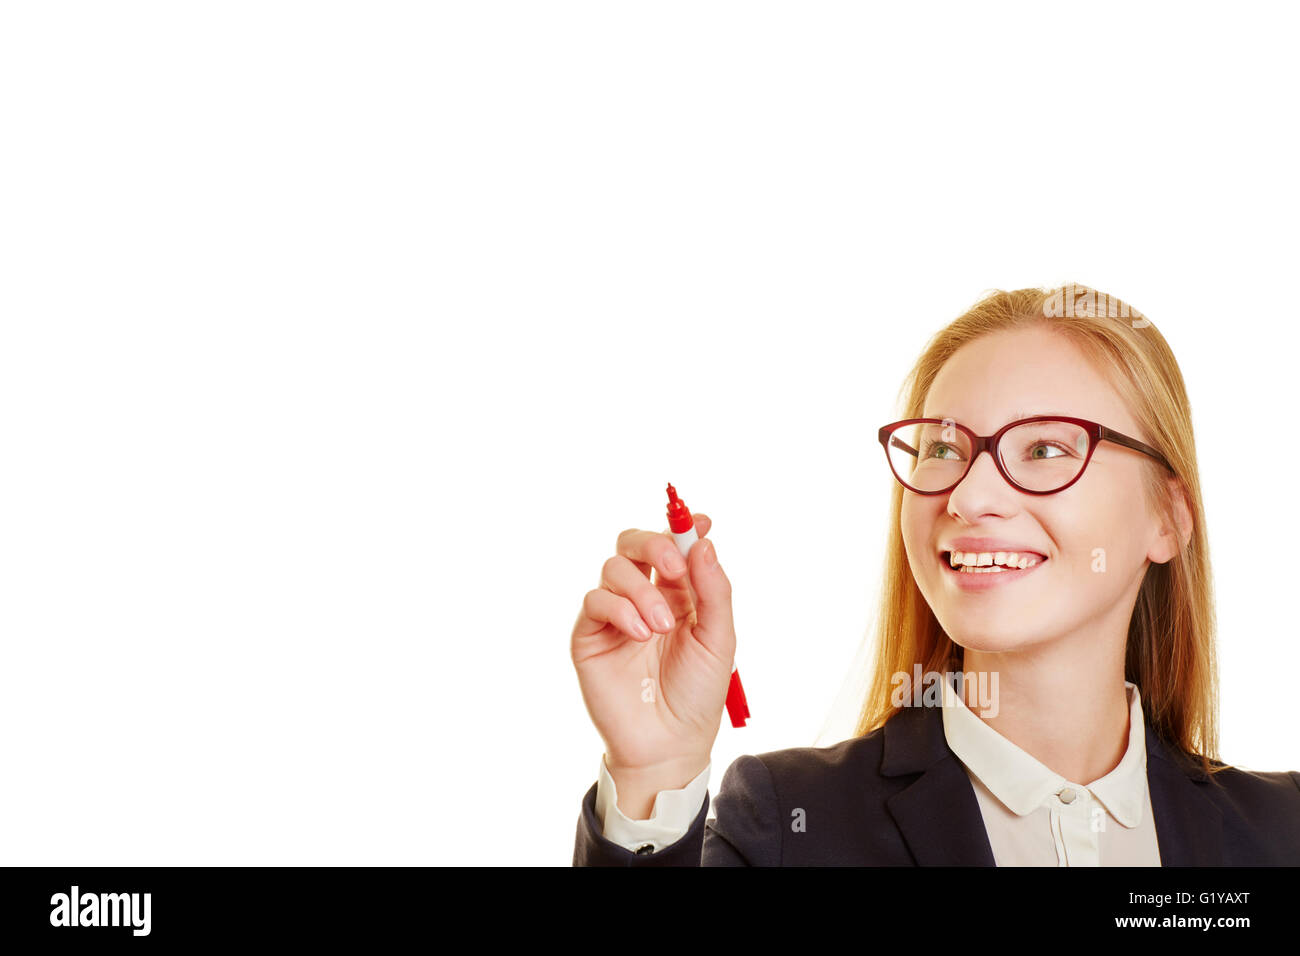 Blond smiling businesswoman writing with a red pen Stock Photo